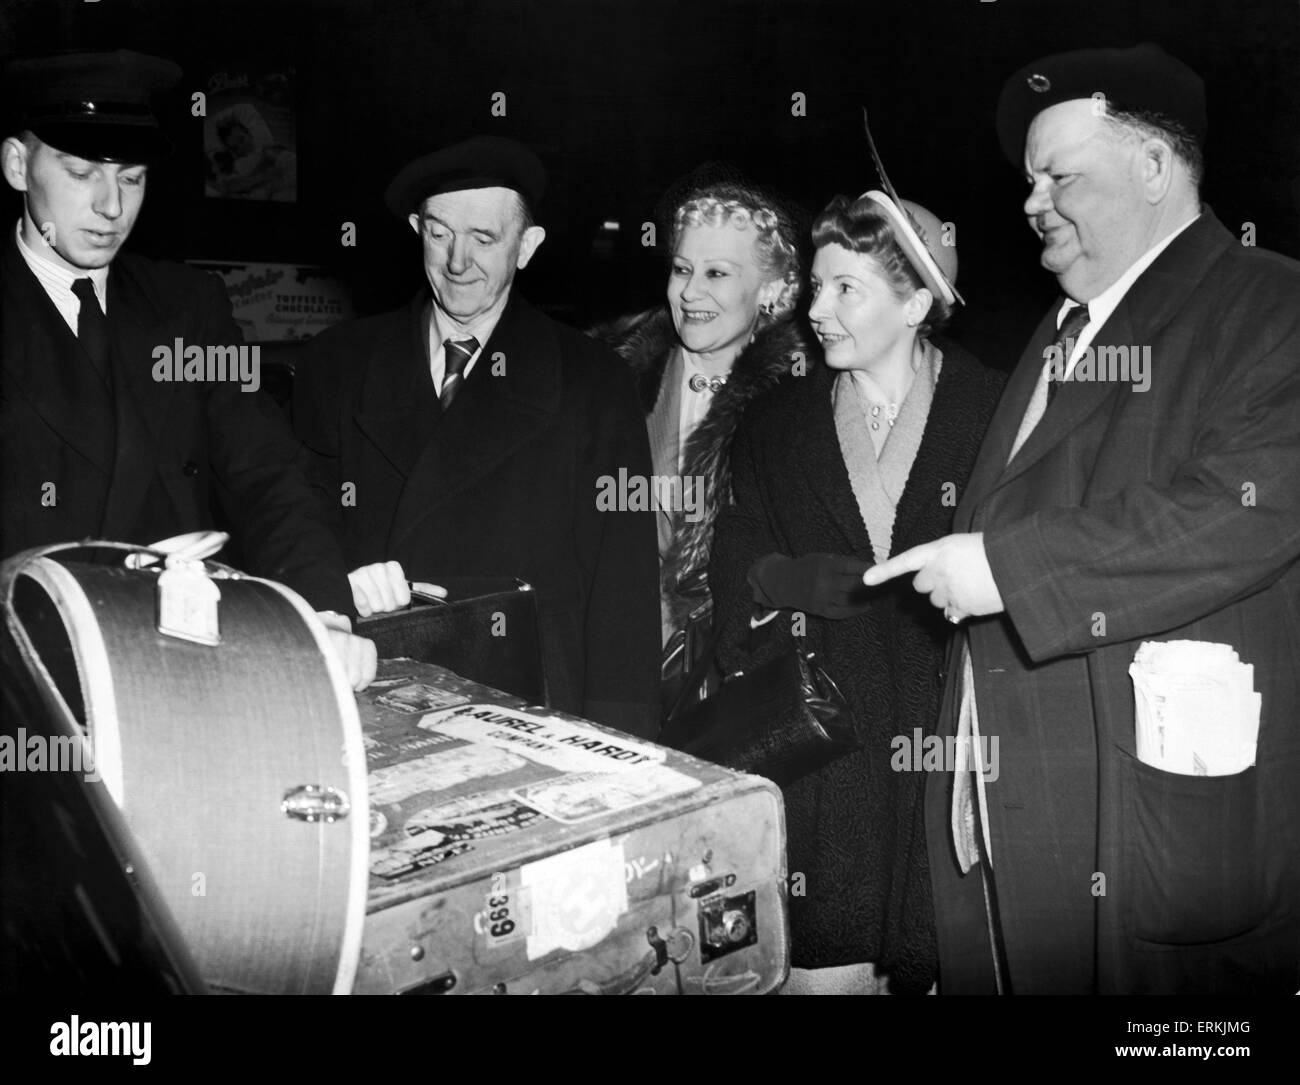 Stan laurel and Oliver hardy departing for the United States of America after their second British tour. 14th September 1952 Stock Photo